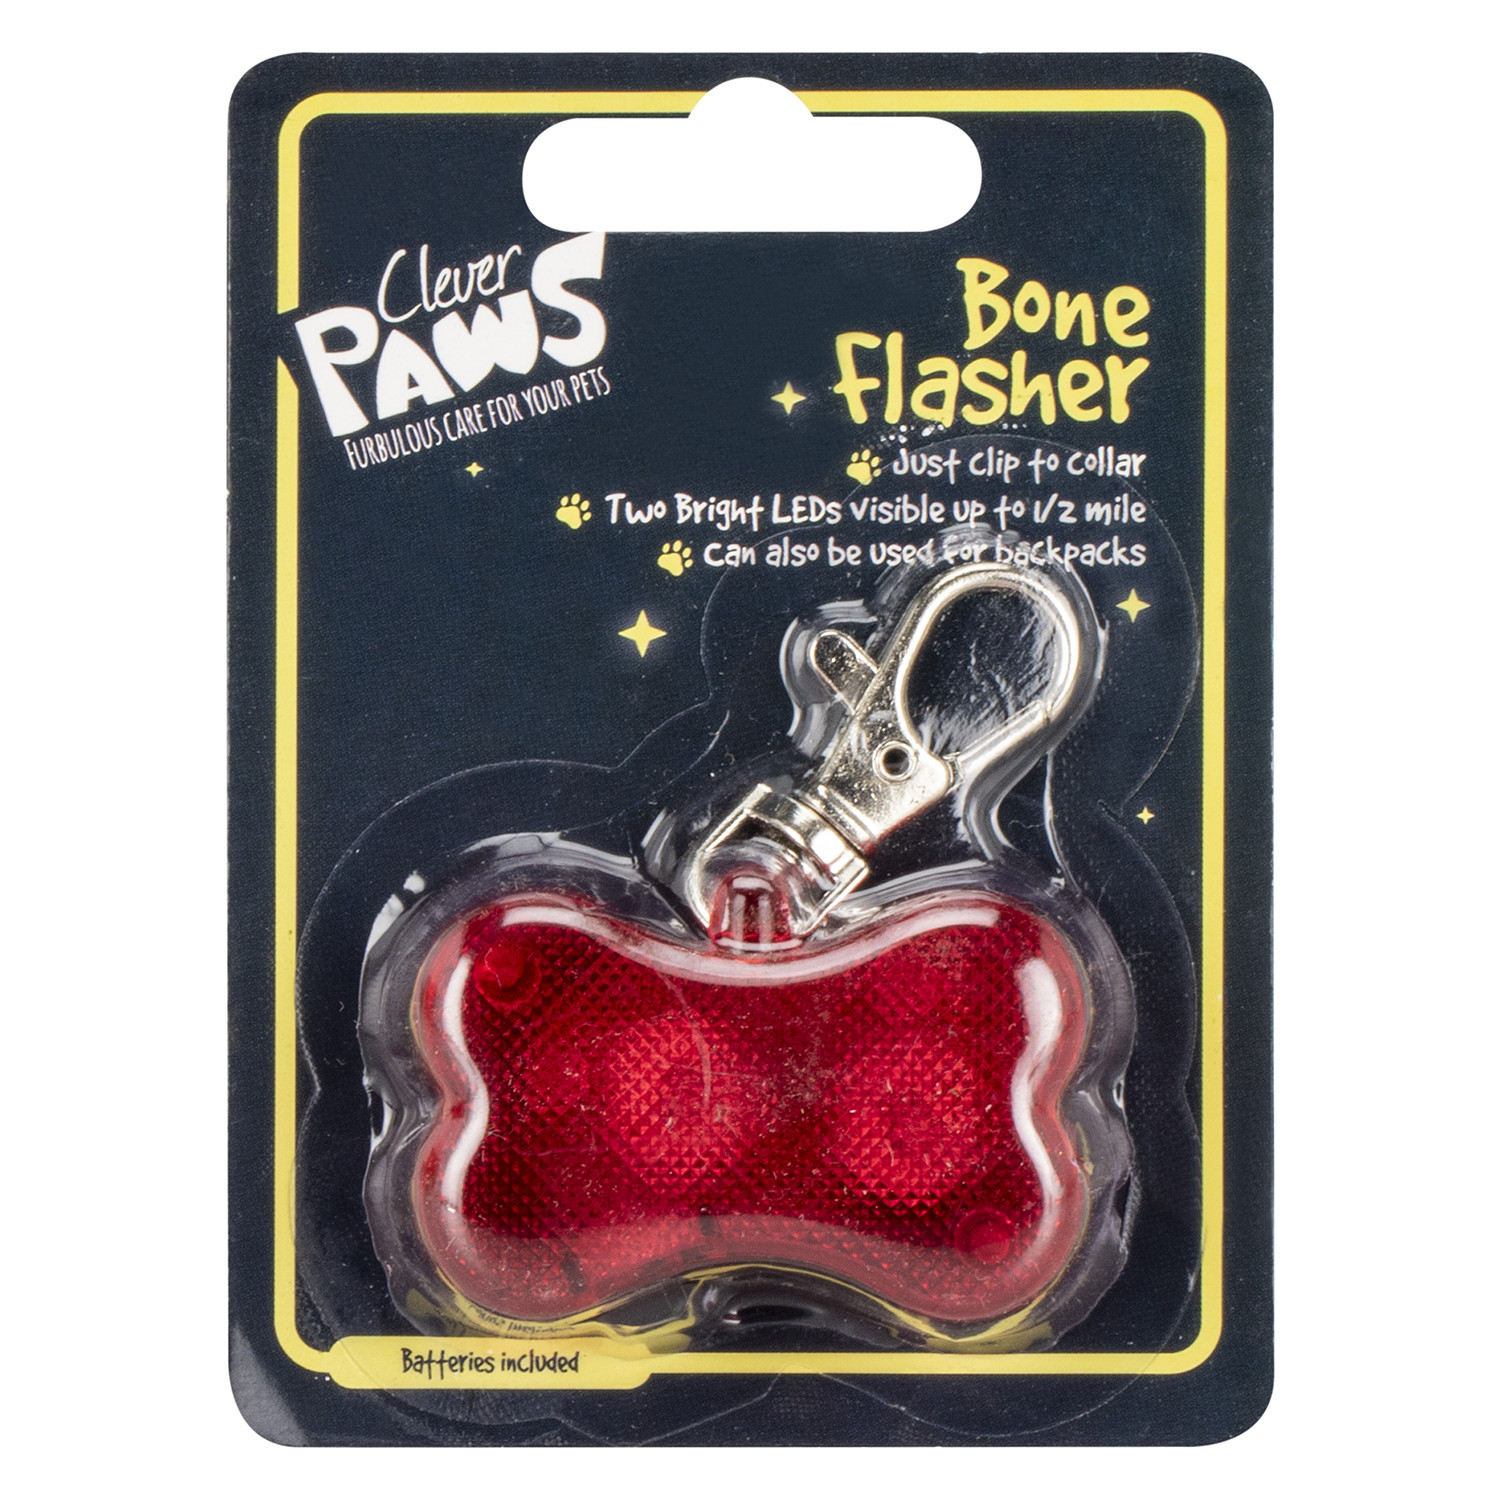 Clever Paws Bone Flasher Image